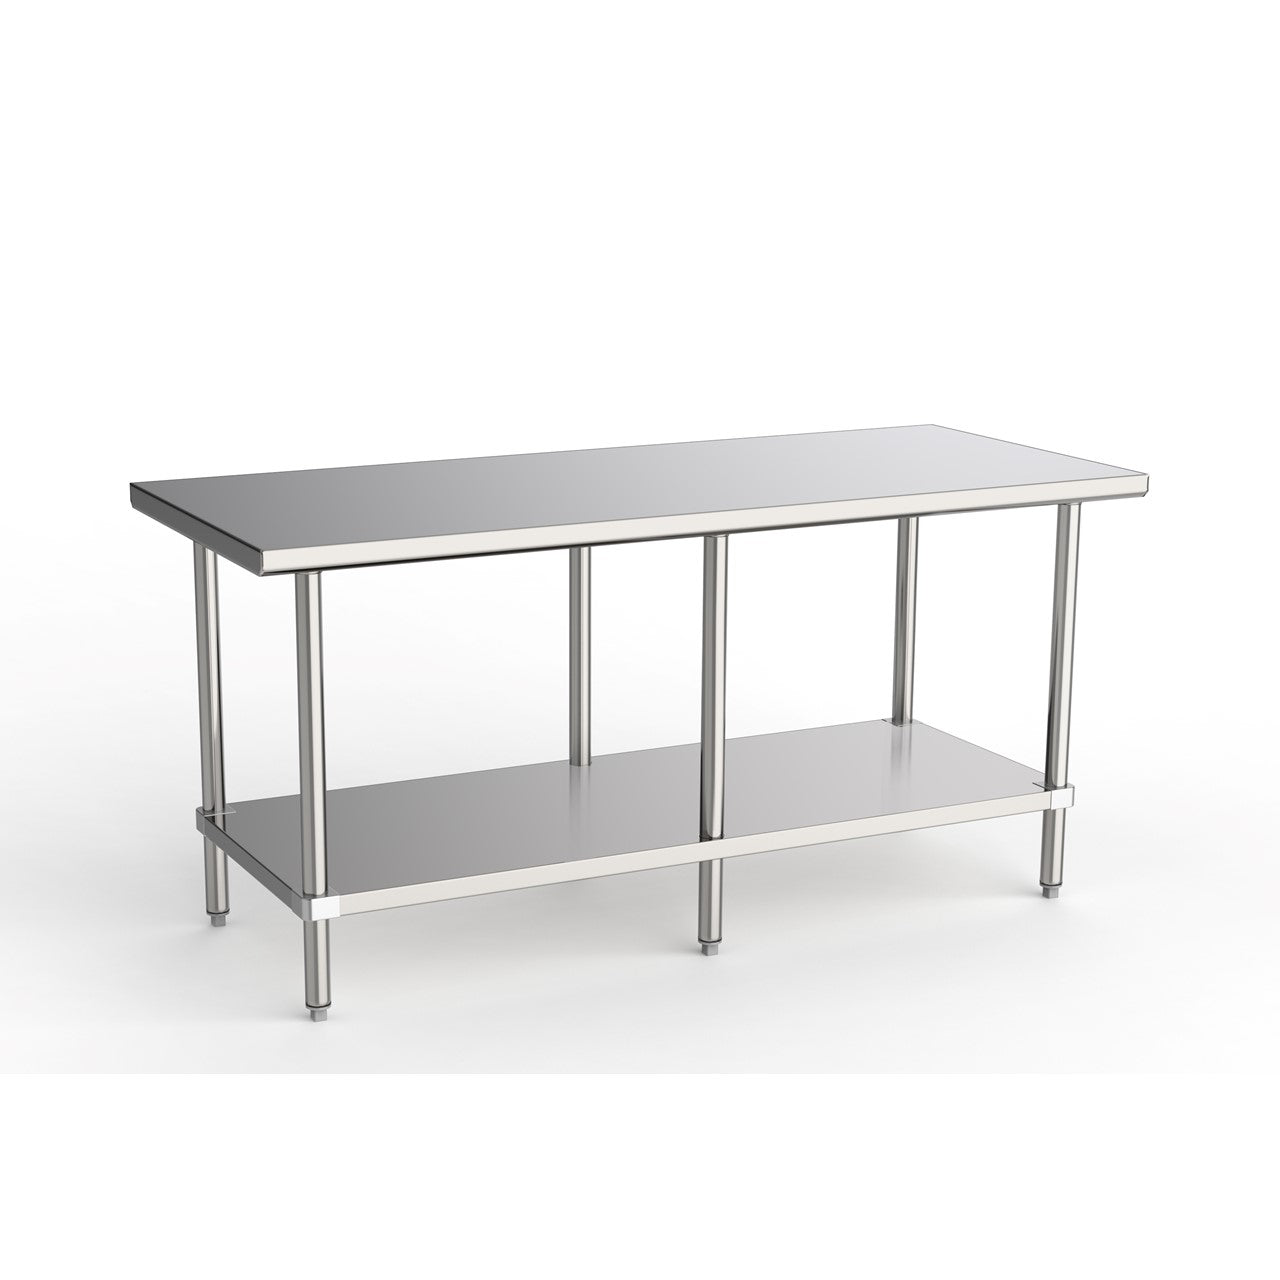 GSW Commercial Grade Flat Top Work Table with All Stainless Steel Top, Undershelf & Legs, Adjustable Bullet Feet, NSF & ETL Approved to Meet Sanitation Food Service Standard 37 (30"D x 96"L x 35"H)